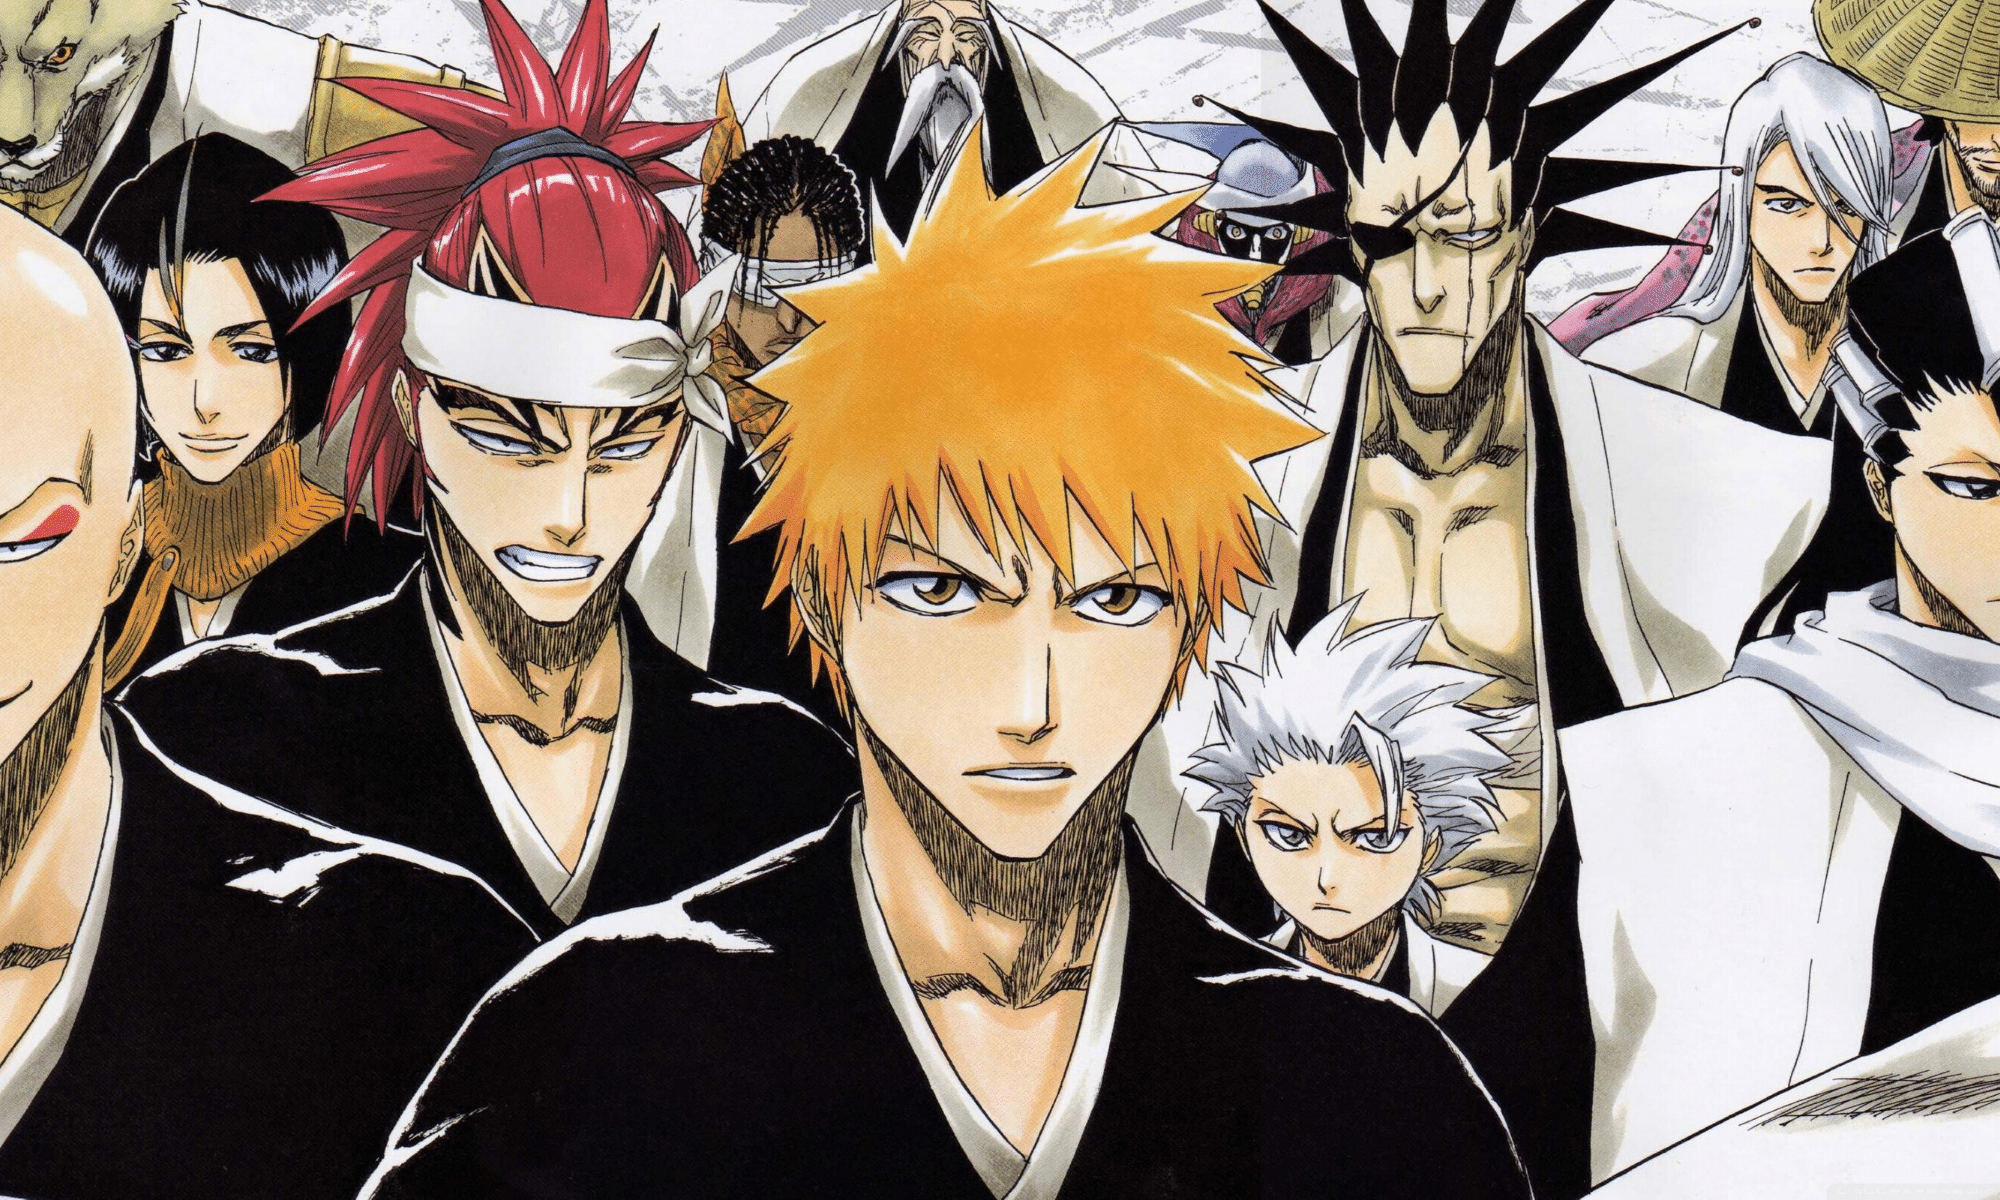 Bleach Filler List: All the Episodes You Can Skip (Ultimate List)